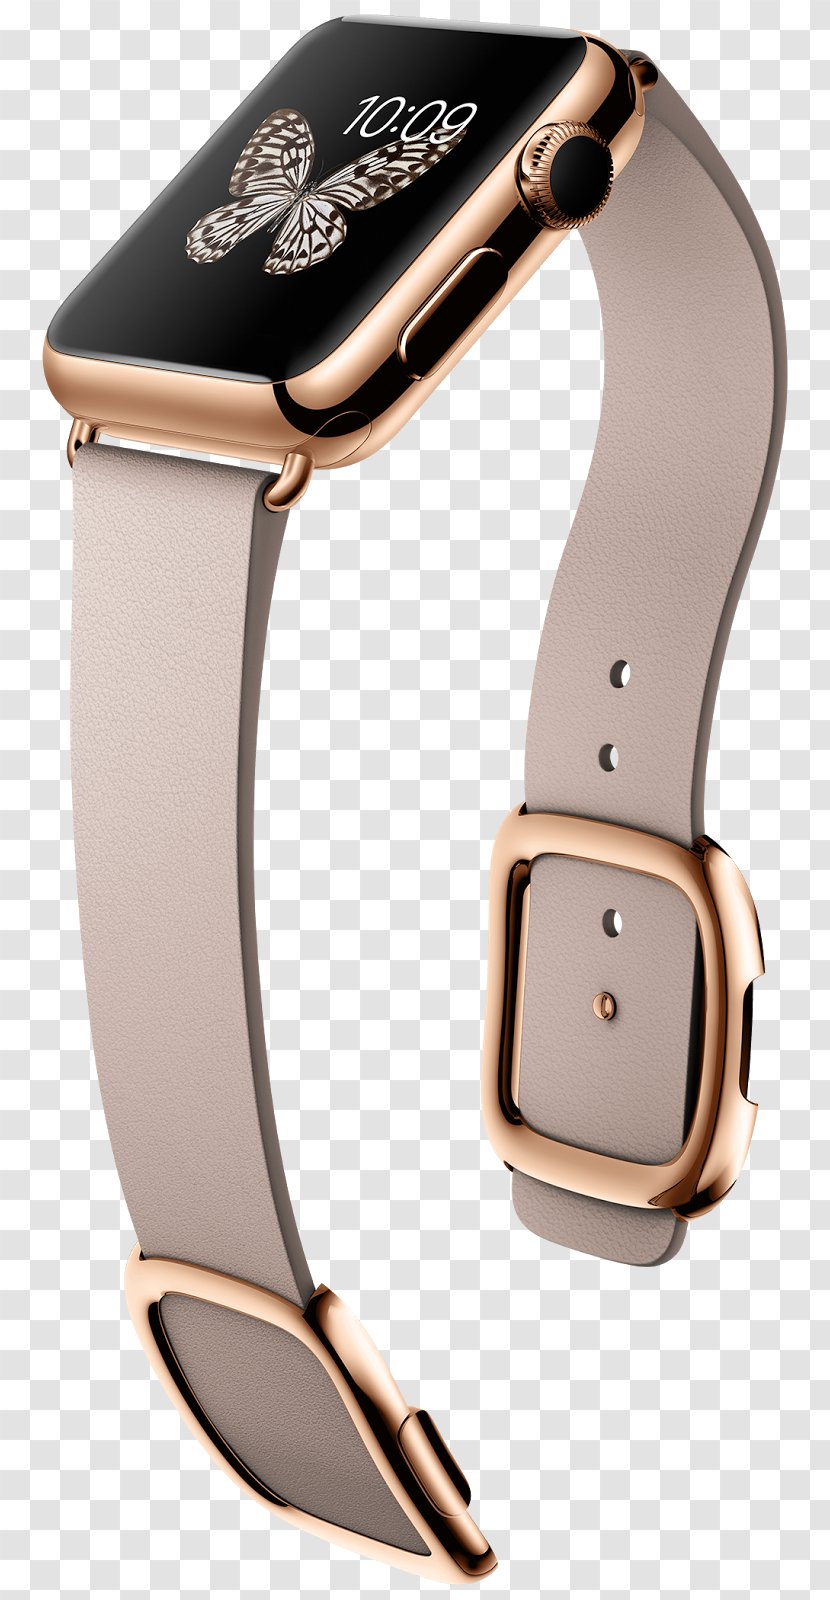 Apple Watch Series 3 2 Smartwatch - Jewellery - Watches Transparent PNG